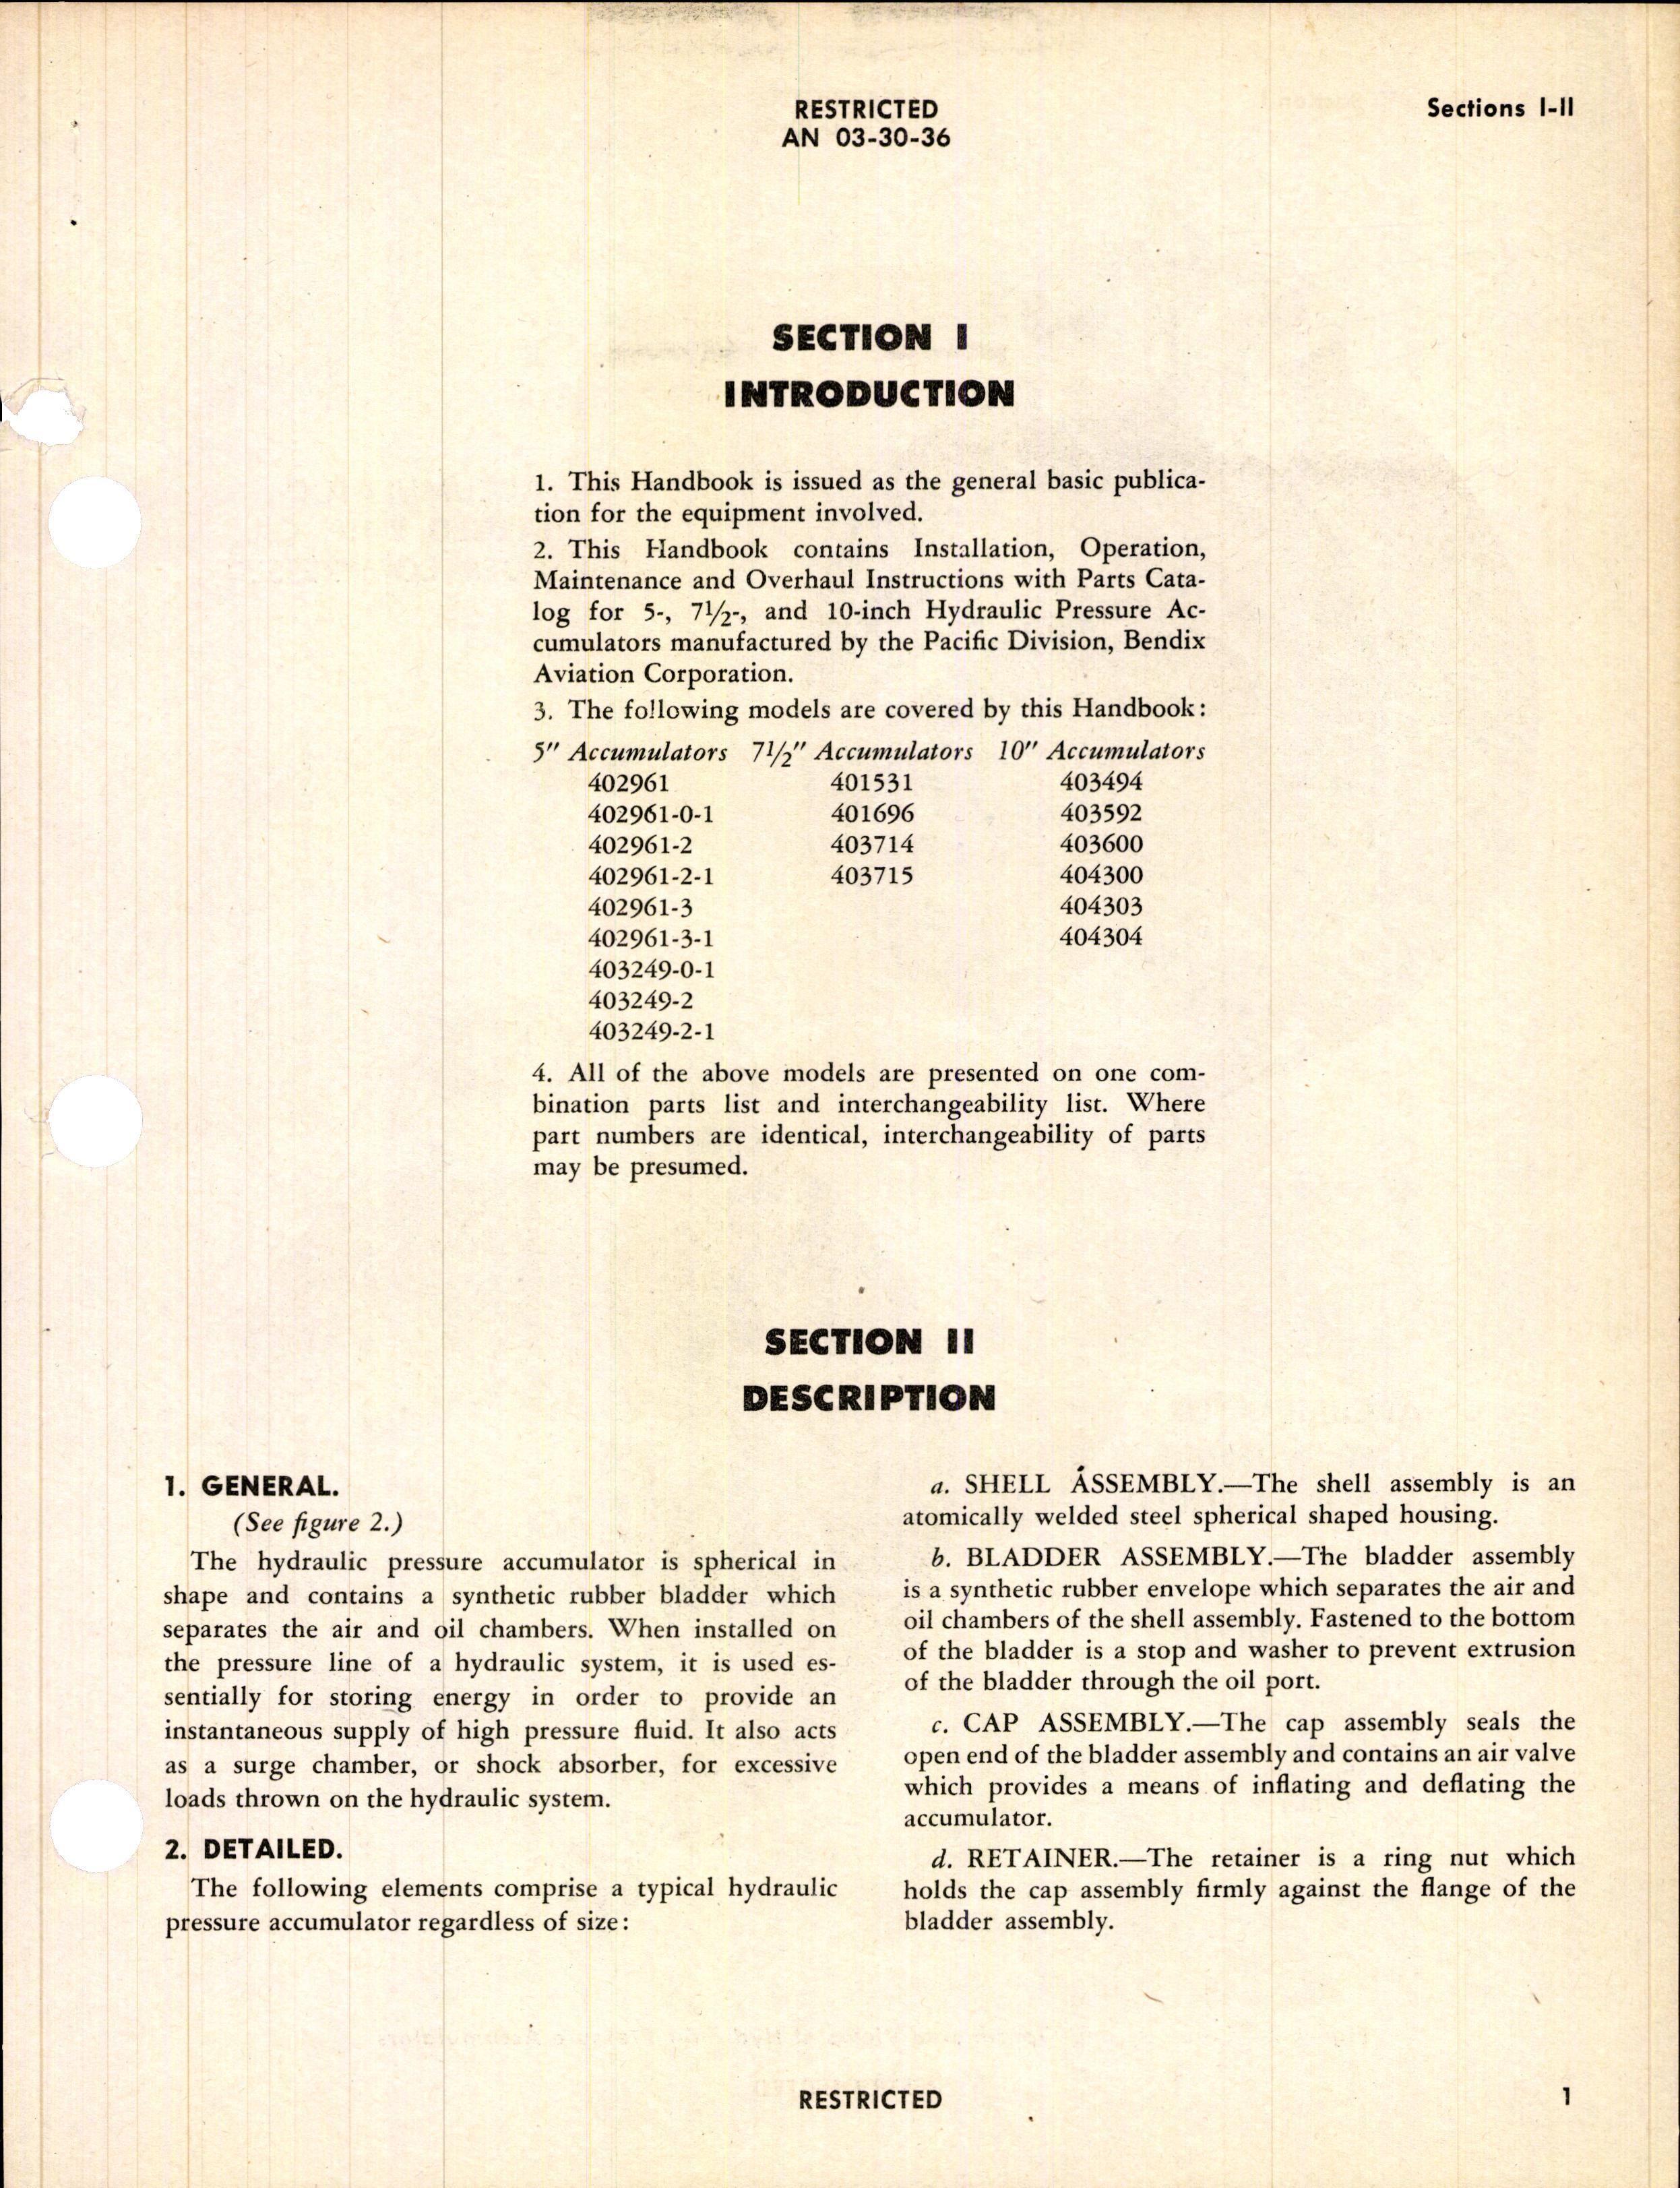 Sample page 5 from AirCorps Library document: Handbook of Instructions with Parts Catalog for Hydraulic Pressure Accumulators